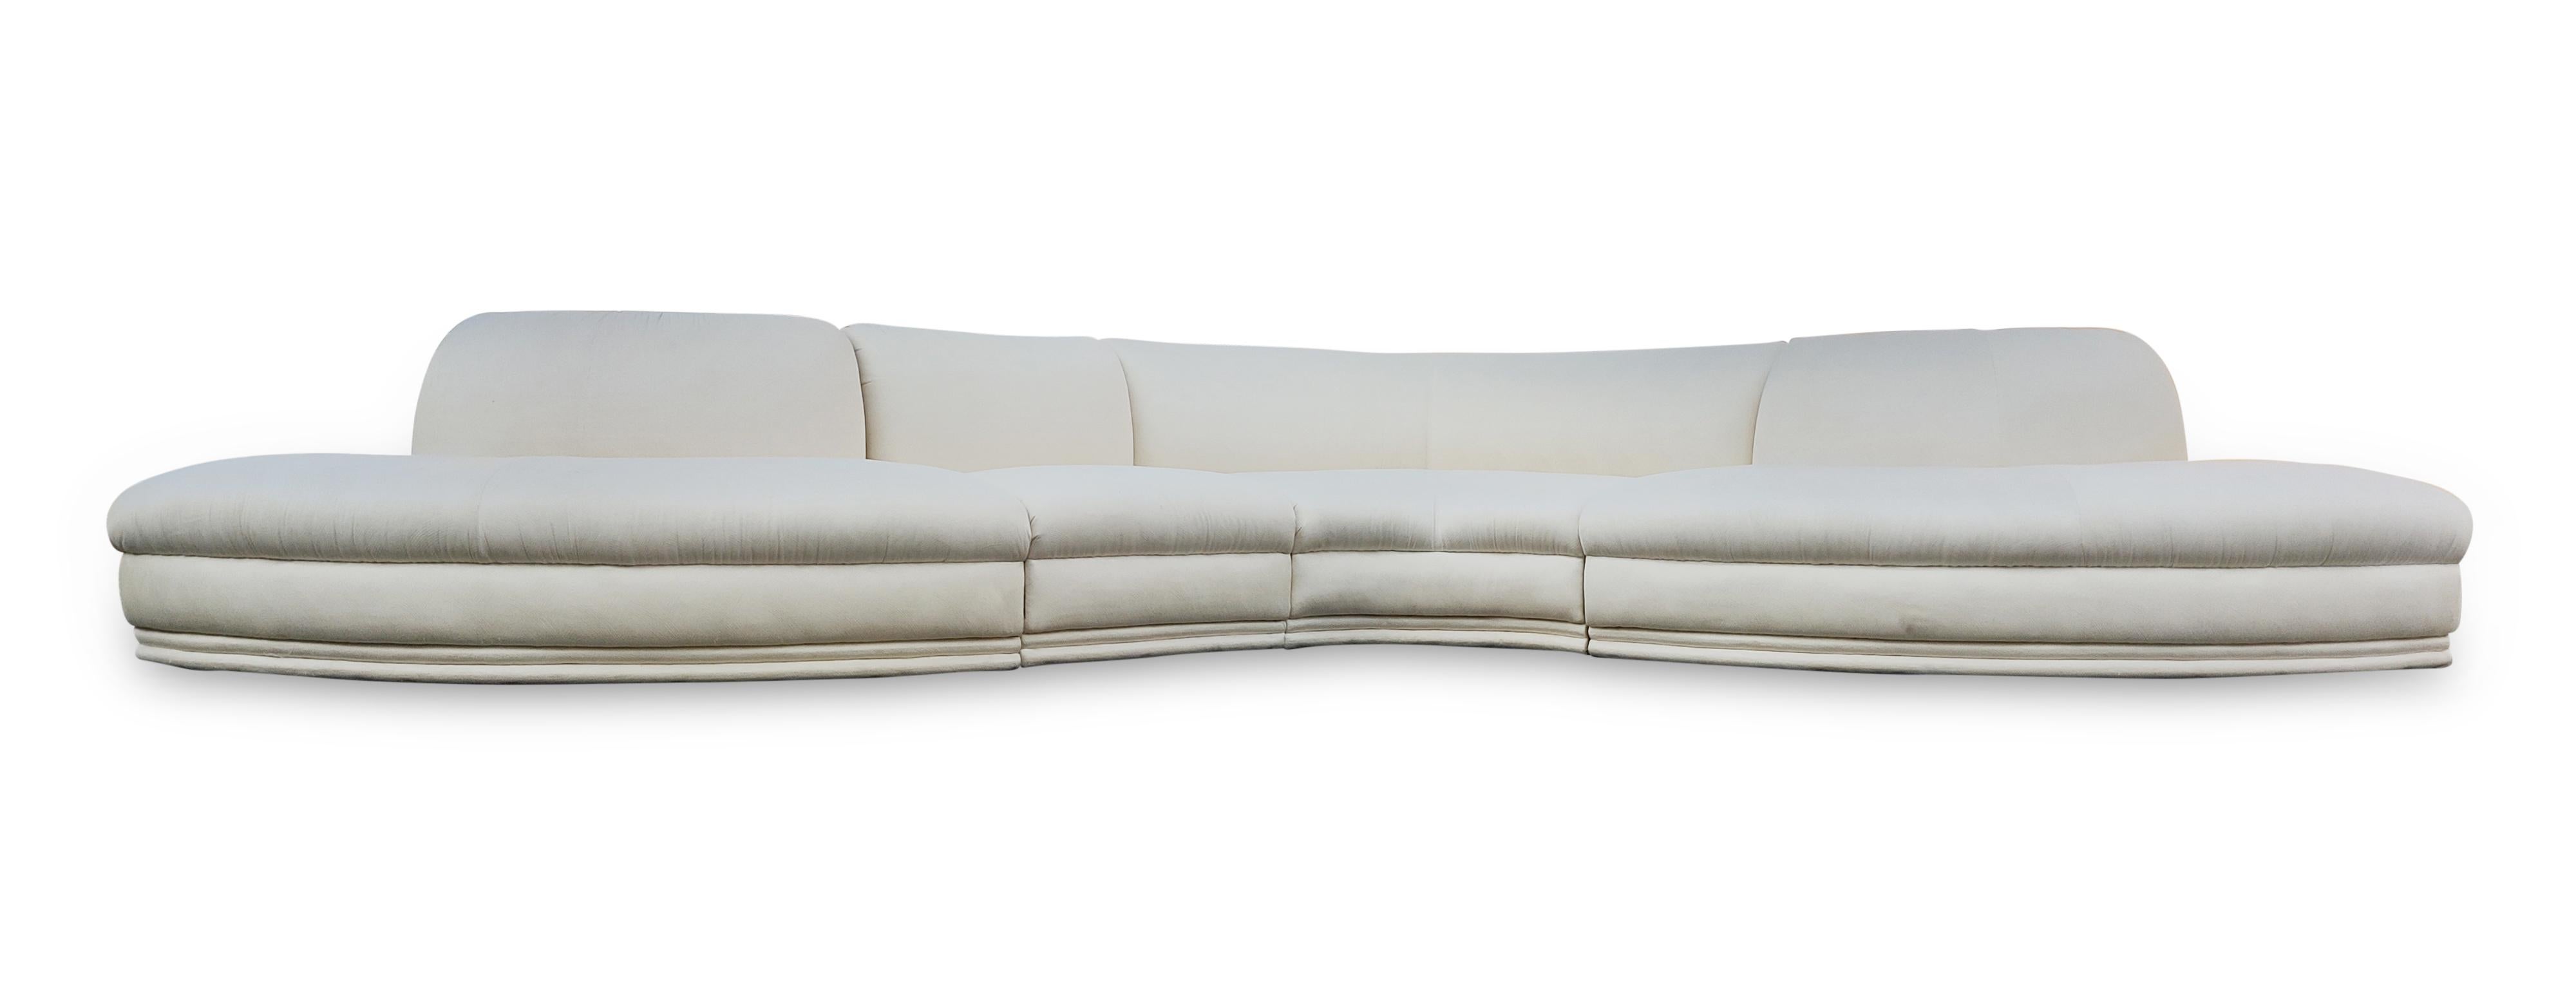 Late 20th Century Weiman Executive Serpentine 4-Section Sectional Sofa White Mid Century Modern